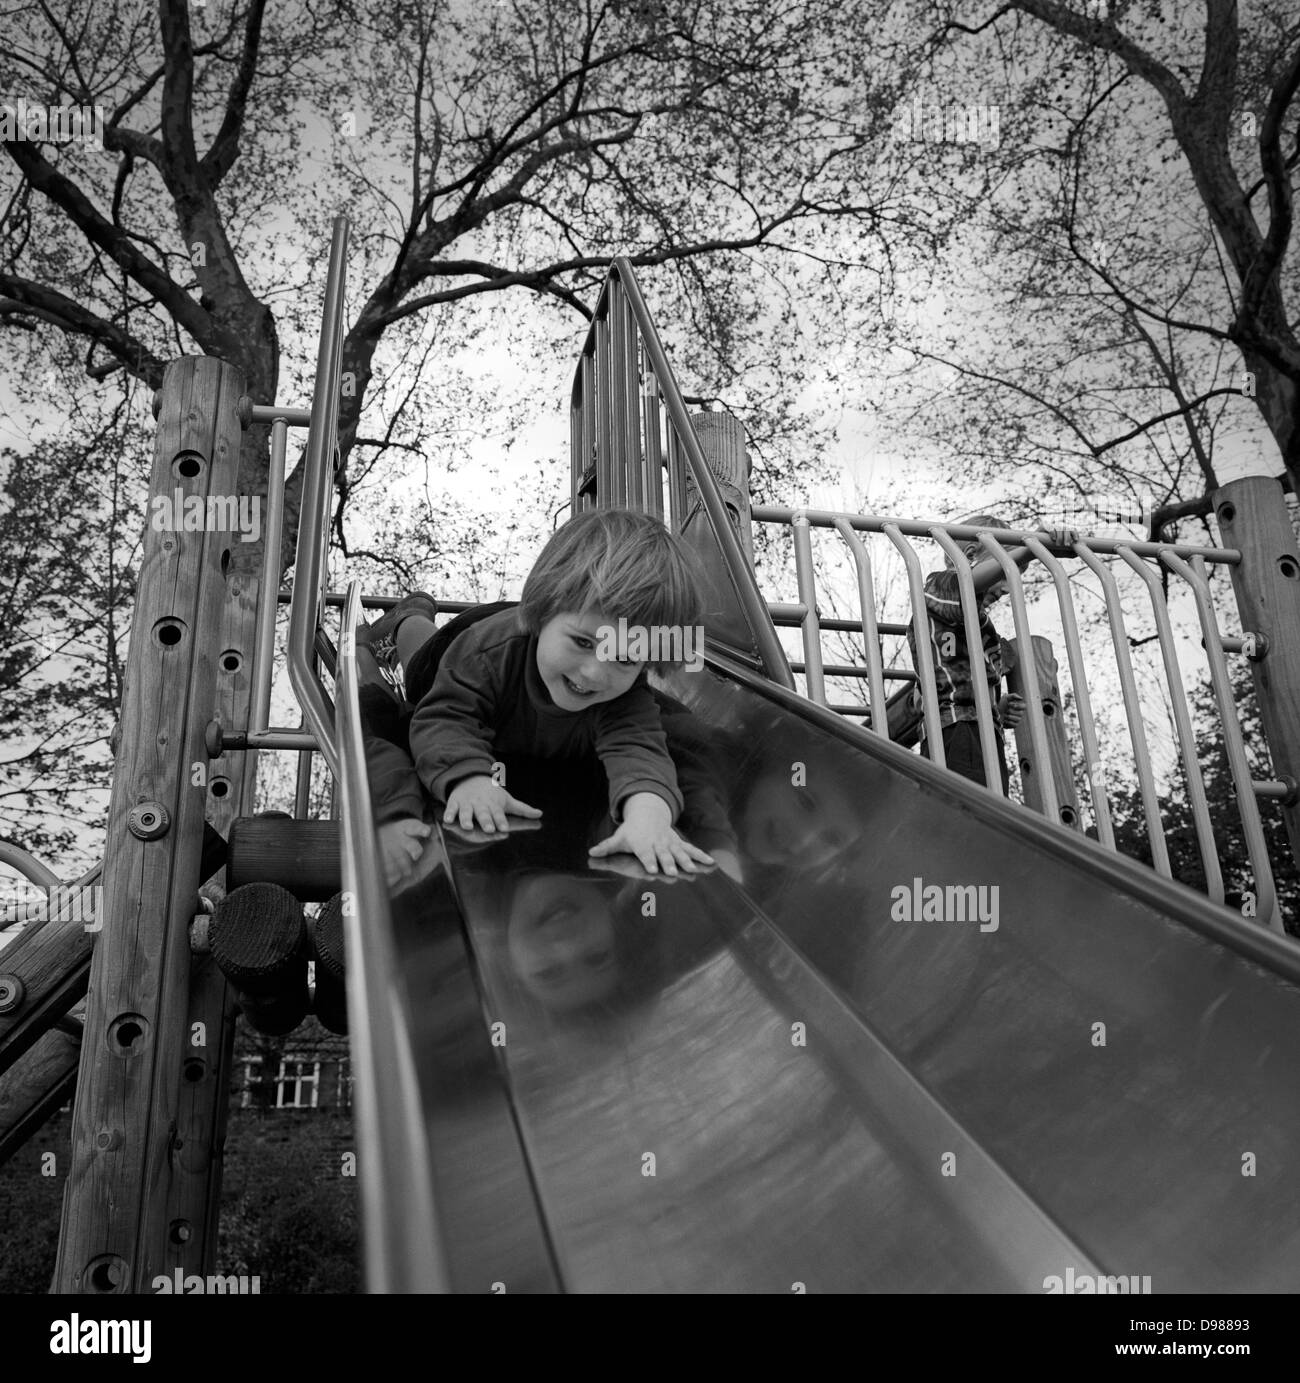 With hands outstretched and a nervous smile on her face, a 3 year-old goes head first down a slide in her local park in south London. The gradient helps the girl on her downward journey as the tentatively slides down with her fingers feeling the polished surface, her smiling, confident face reflected on the three sides of the slide's metal. Tall London plane trees rise above in this public London space. Stock Photo